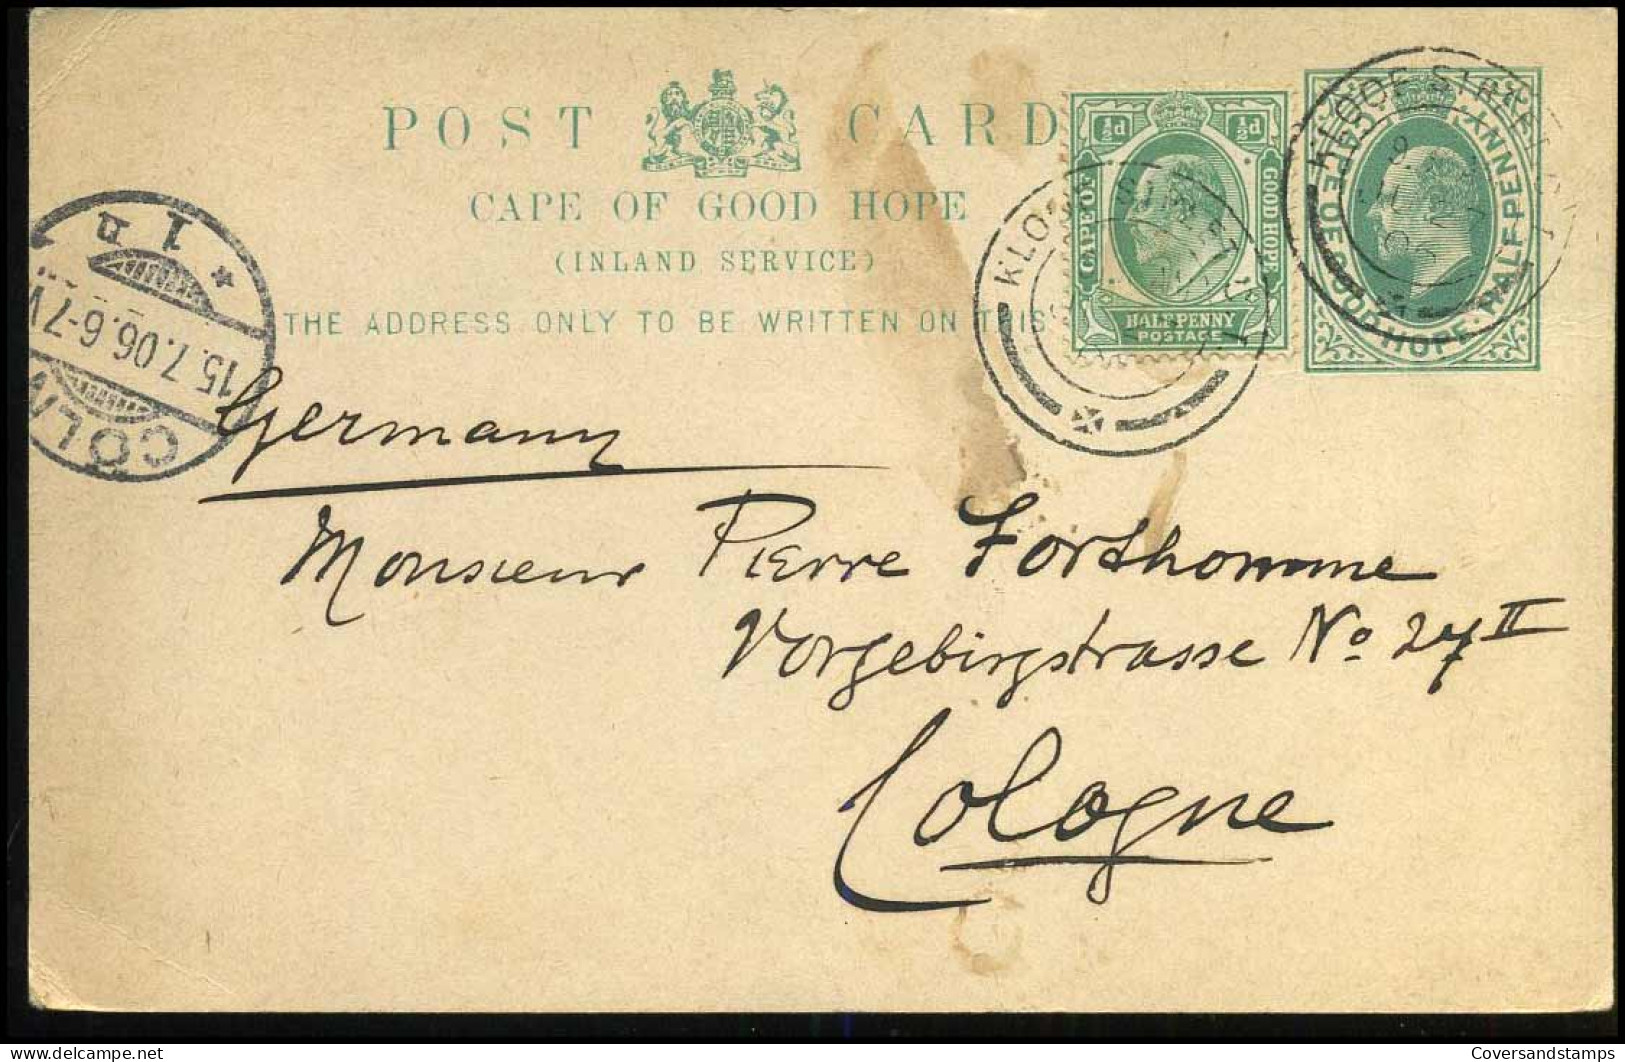 Post Card From Cape Town To Cologne, Germany - 15/07/1906 - Kaap De Goede Hoop (1853-1904)